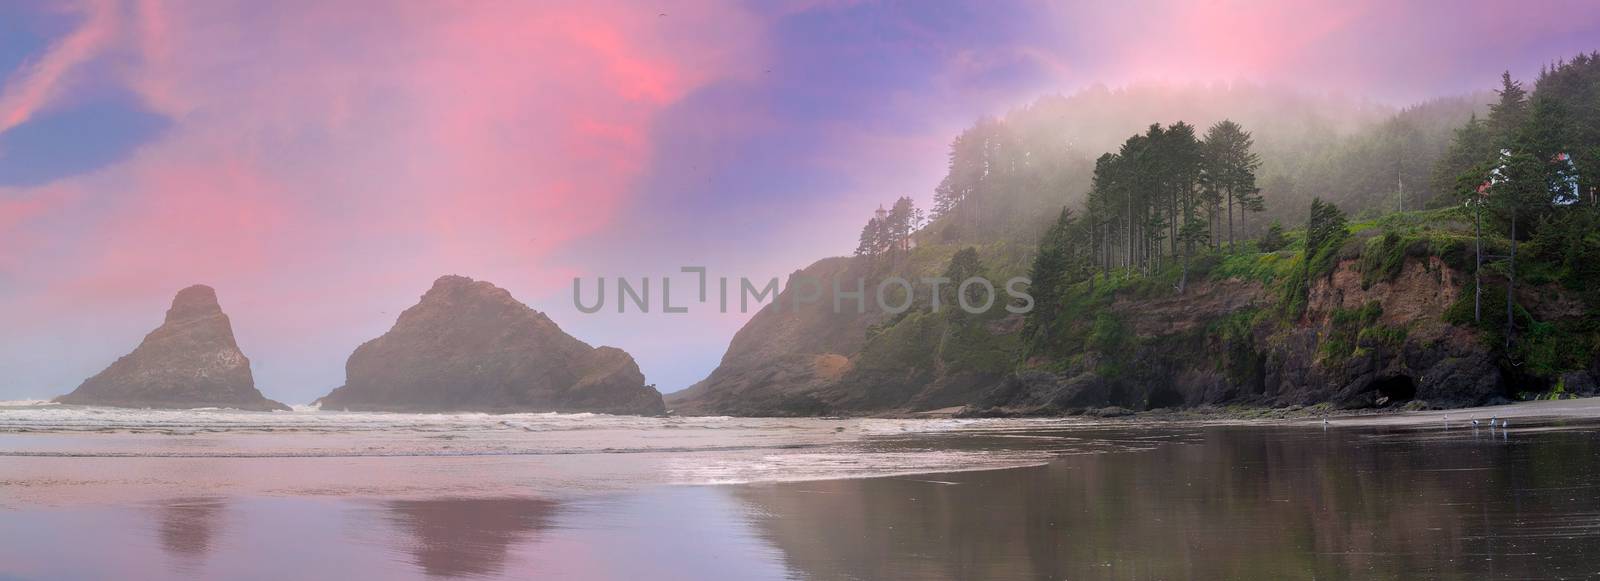 Heceta Head Lighthouse State Park Panorama by jpldesigns